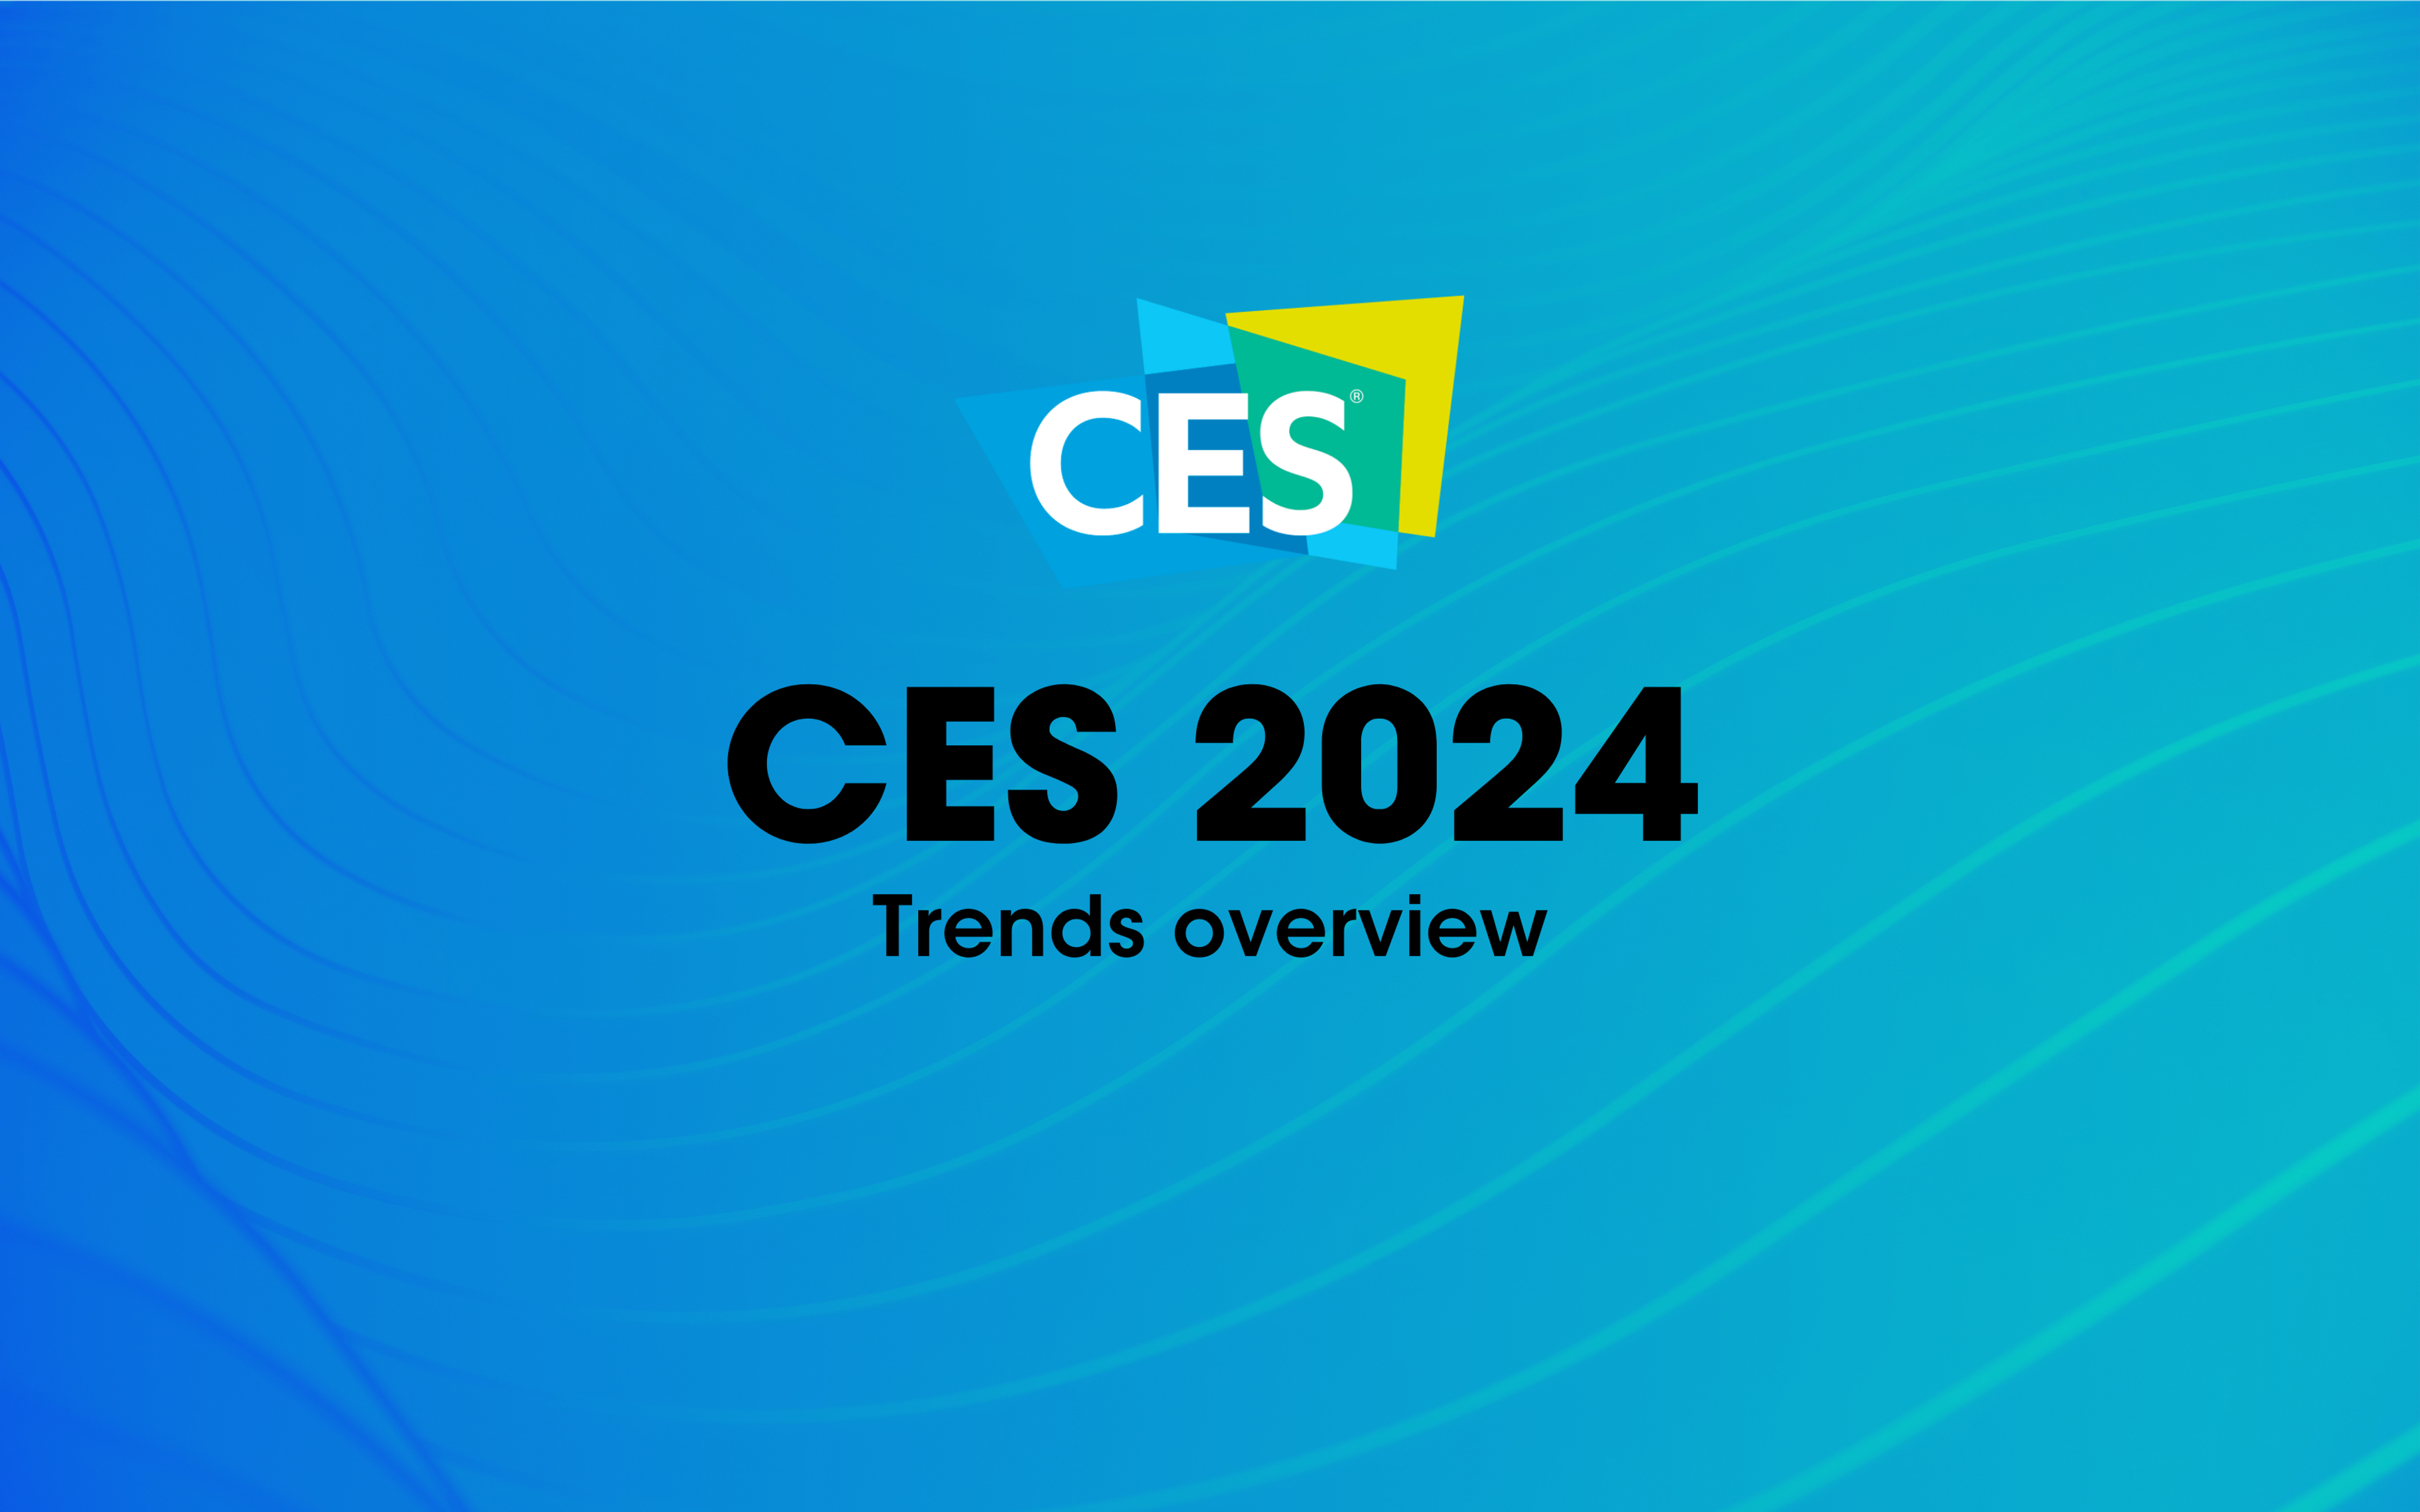 CES 2024: The world's largest tech show is back